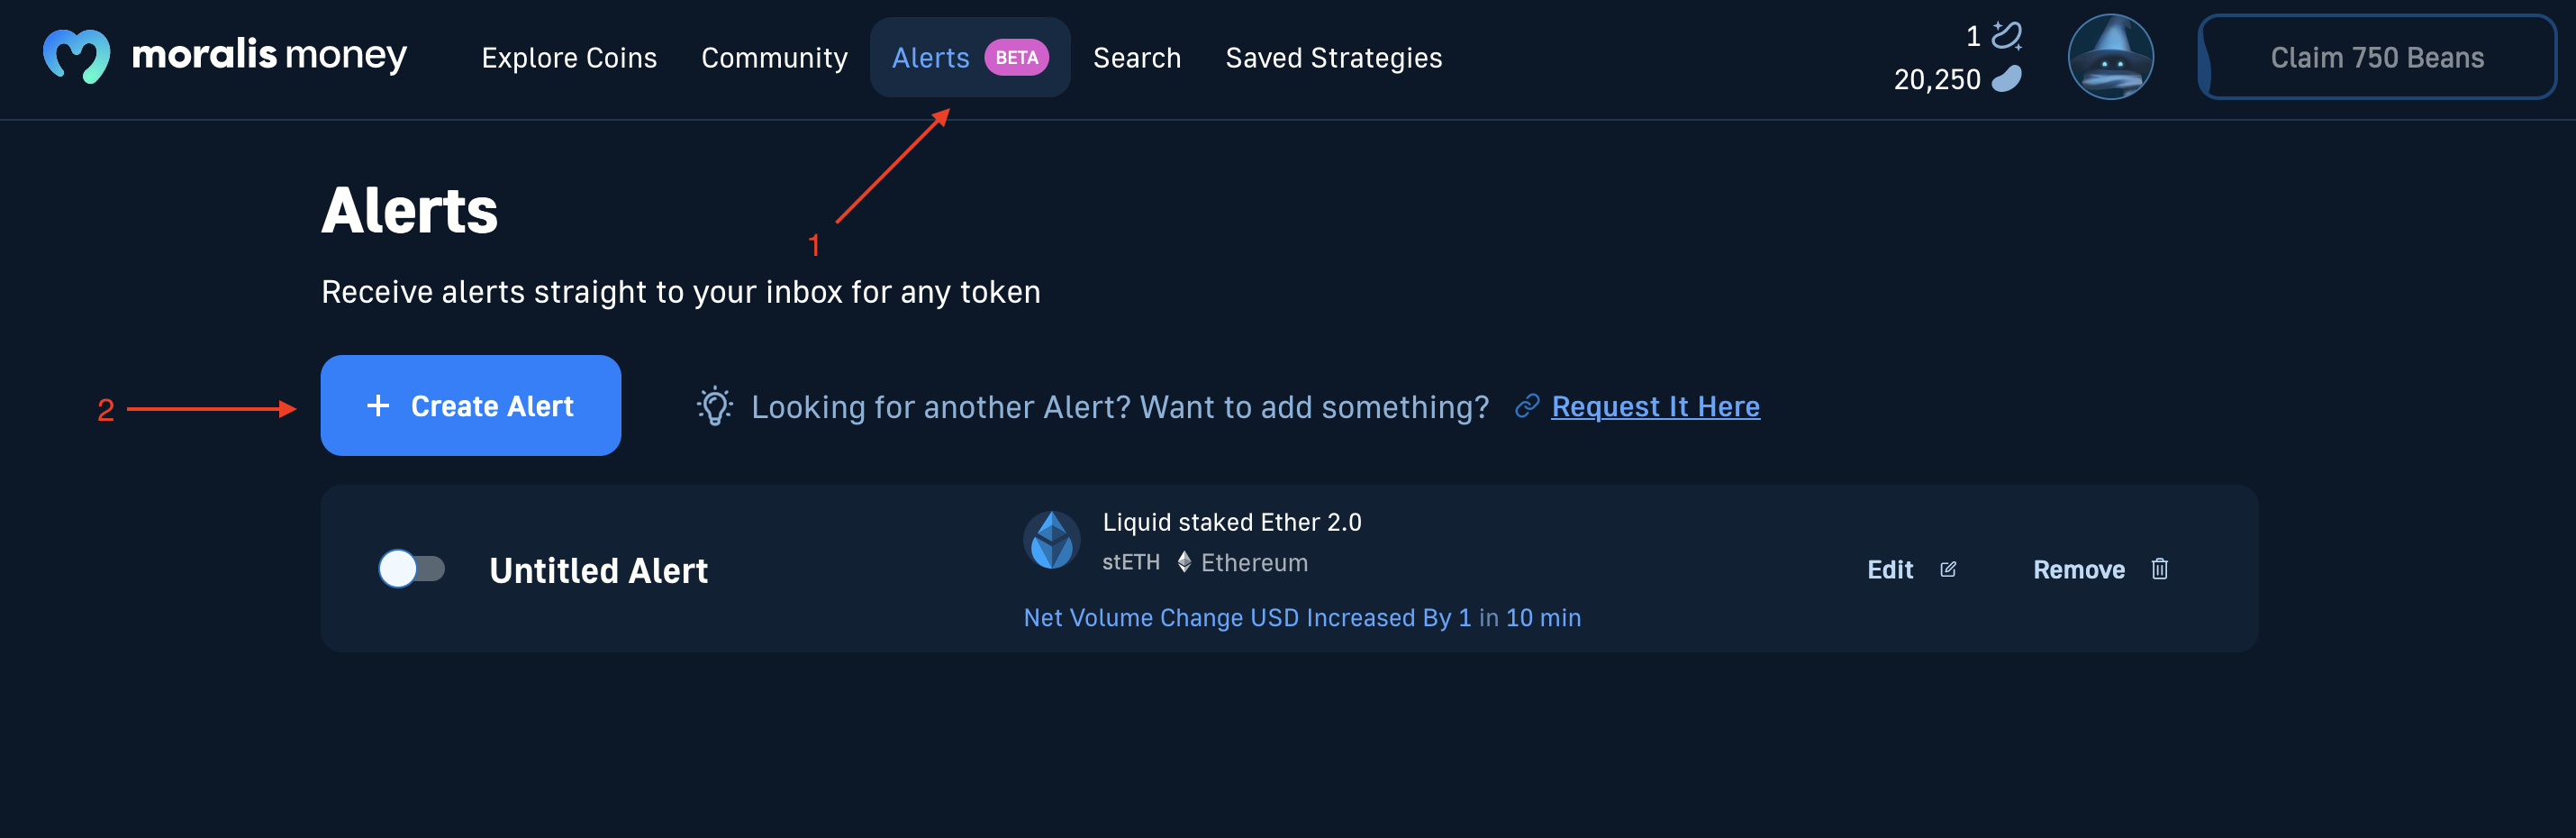 Crypto Trading Tips Number 2: Use Moralis Money Token Alerts - Image shows how to set up alerts